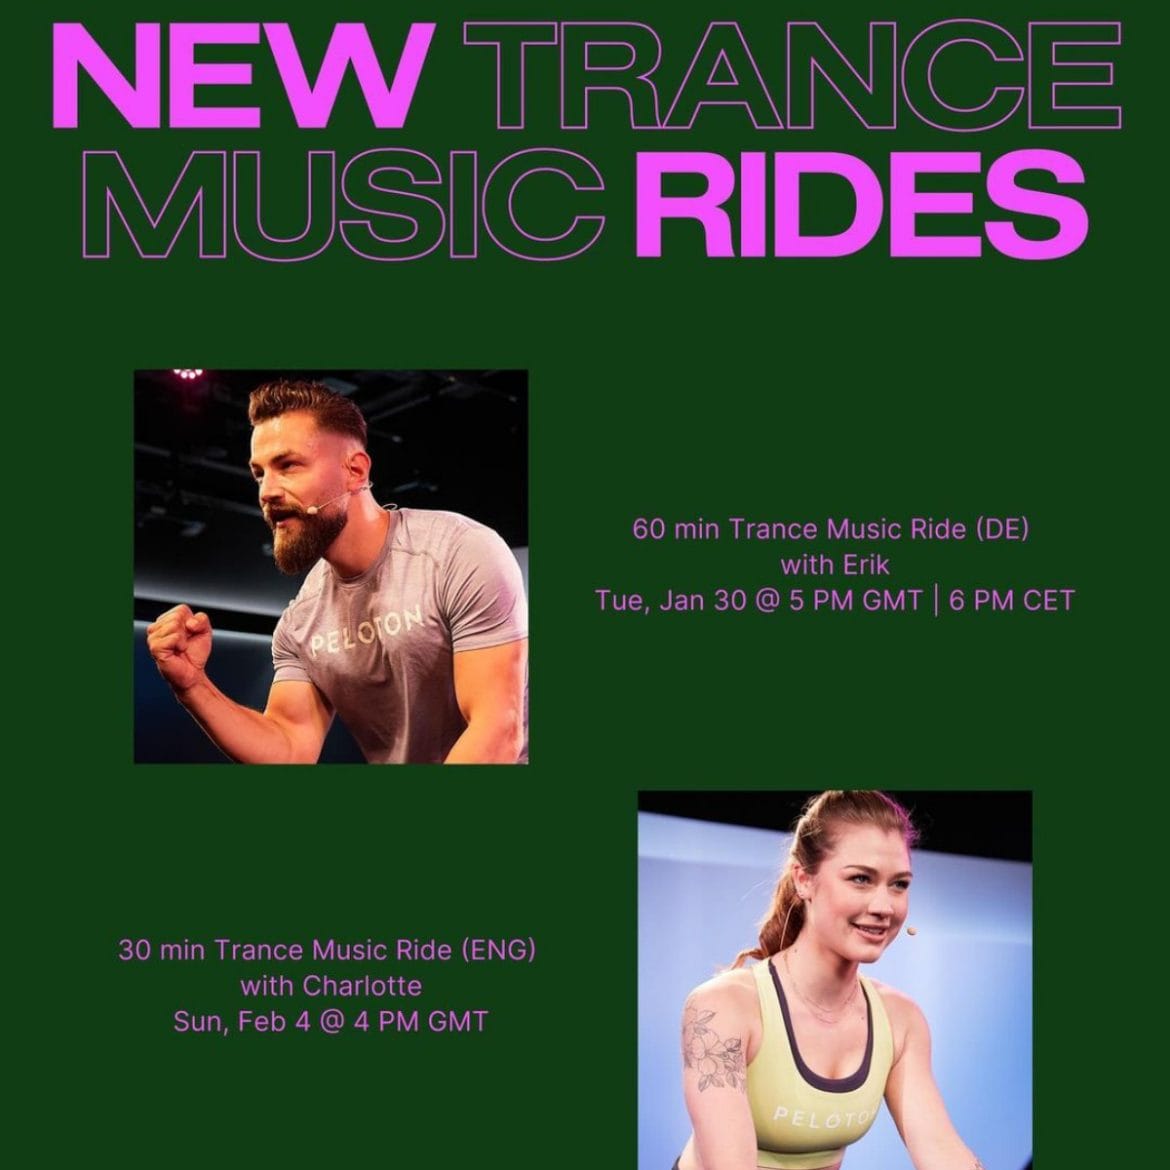 Trance classes as advertised by @PelotonStudios